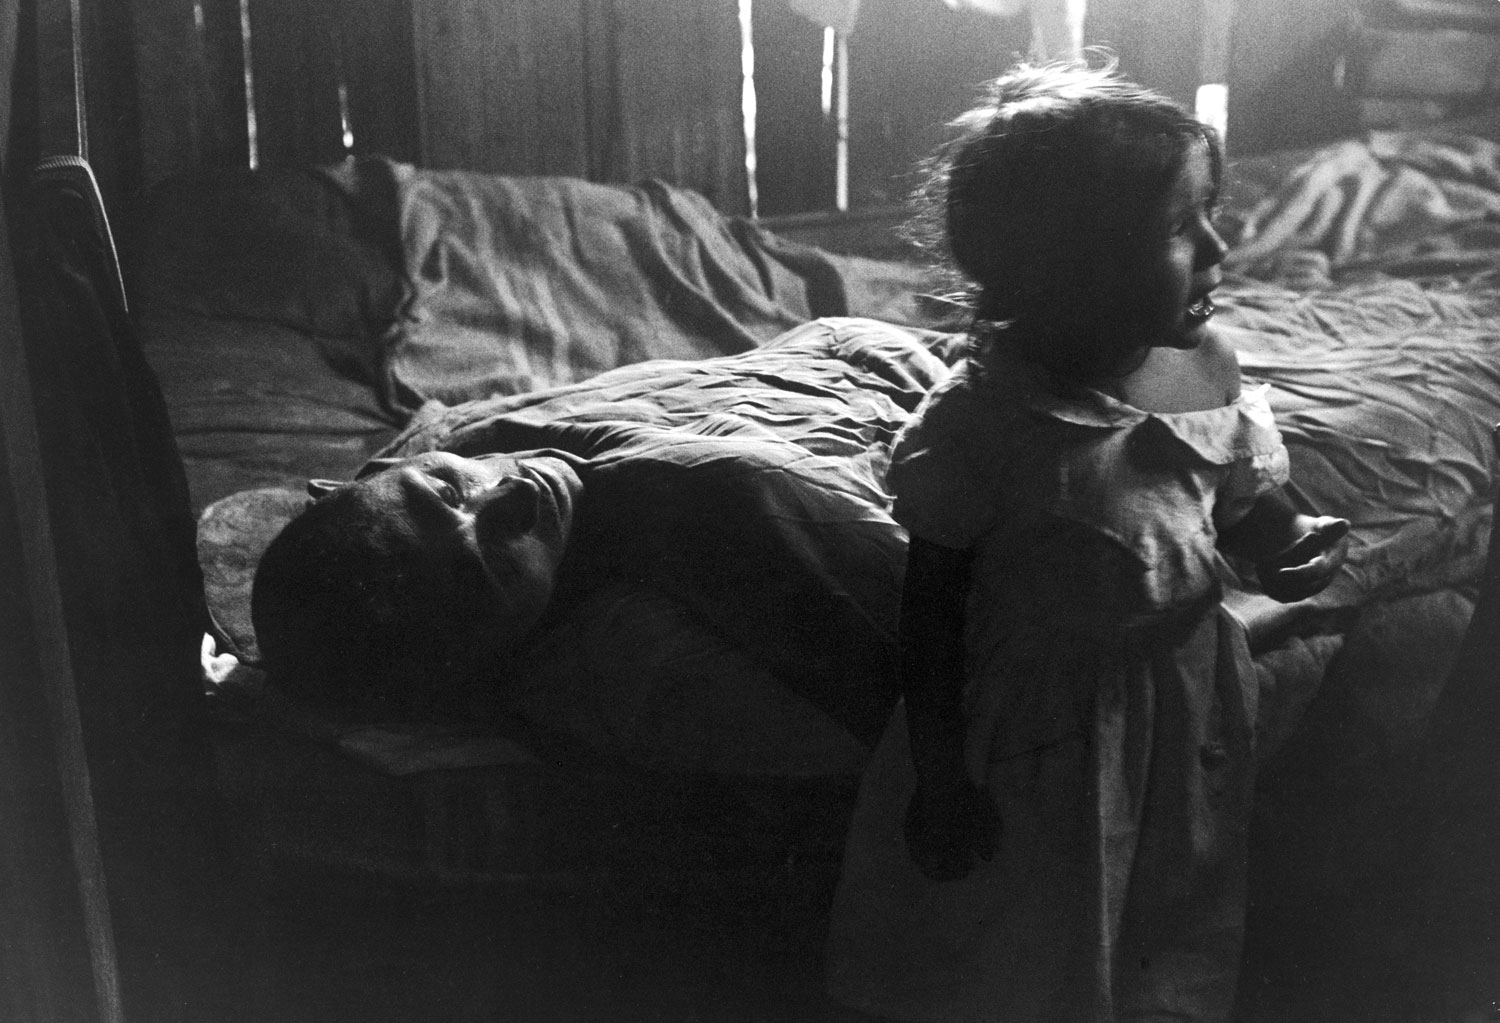 In the shadowy slum world into which she was born in Rio de Janeiro, 3-year old Isabel da Silva cries to herself after vainly seeking comfort from her exhausted father, Jose.